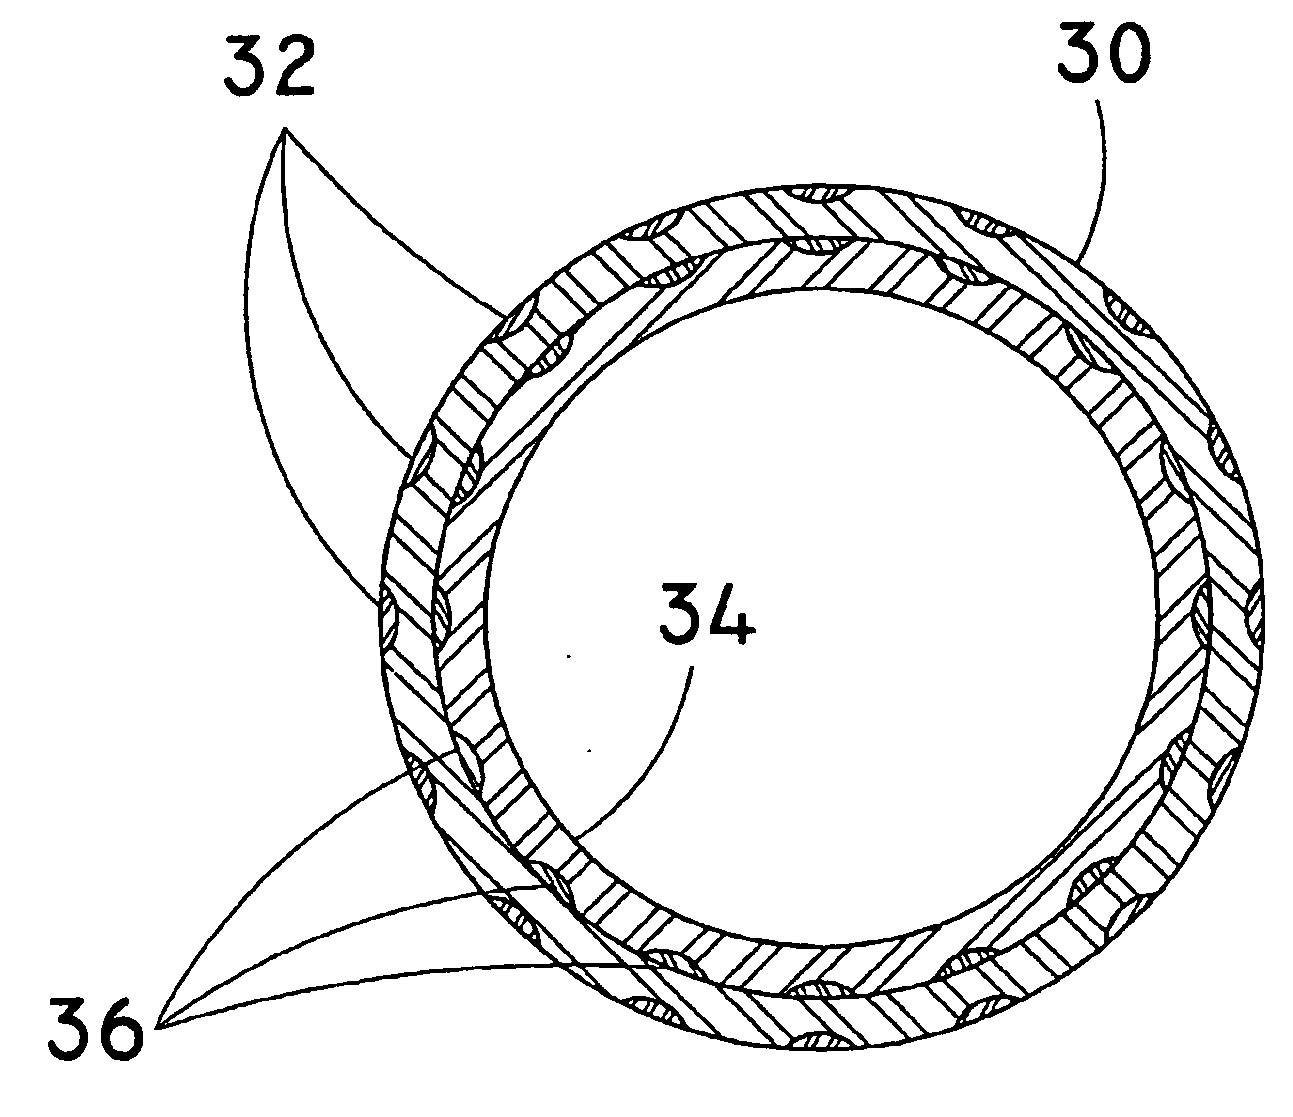 Introducer Sheath and Method for Making